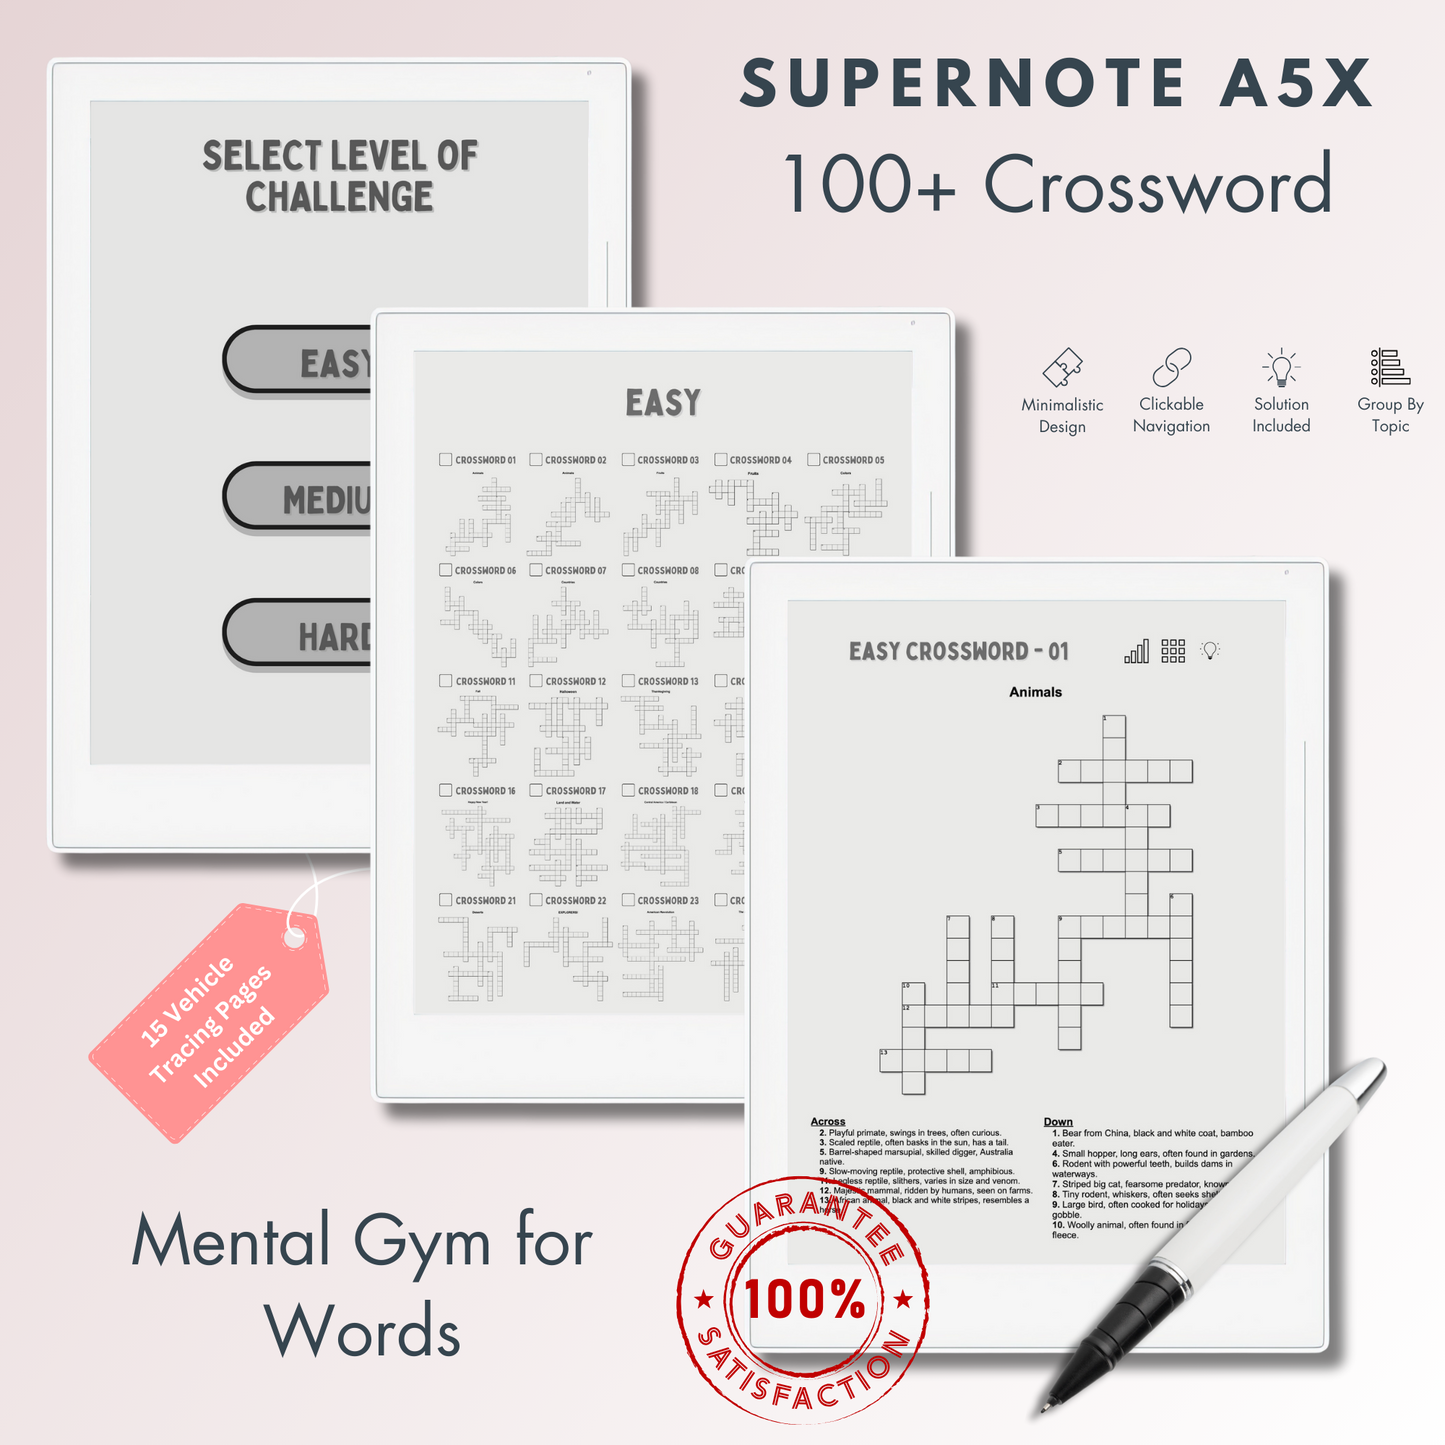 This is a Digital Download of 100+ Crossword Puzzles in 3 different levels tailored for Supernote A5X and A6X.